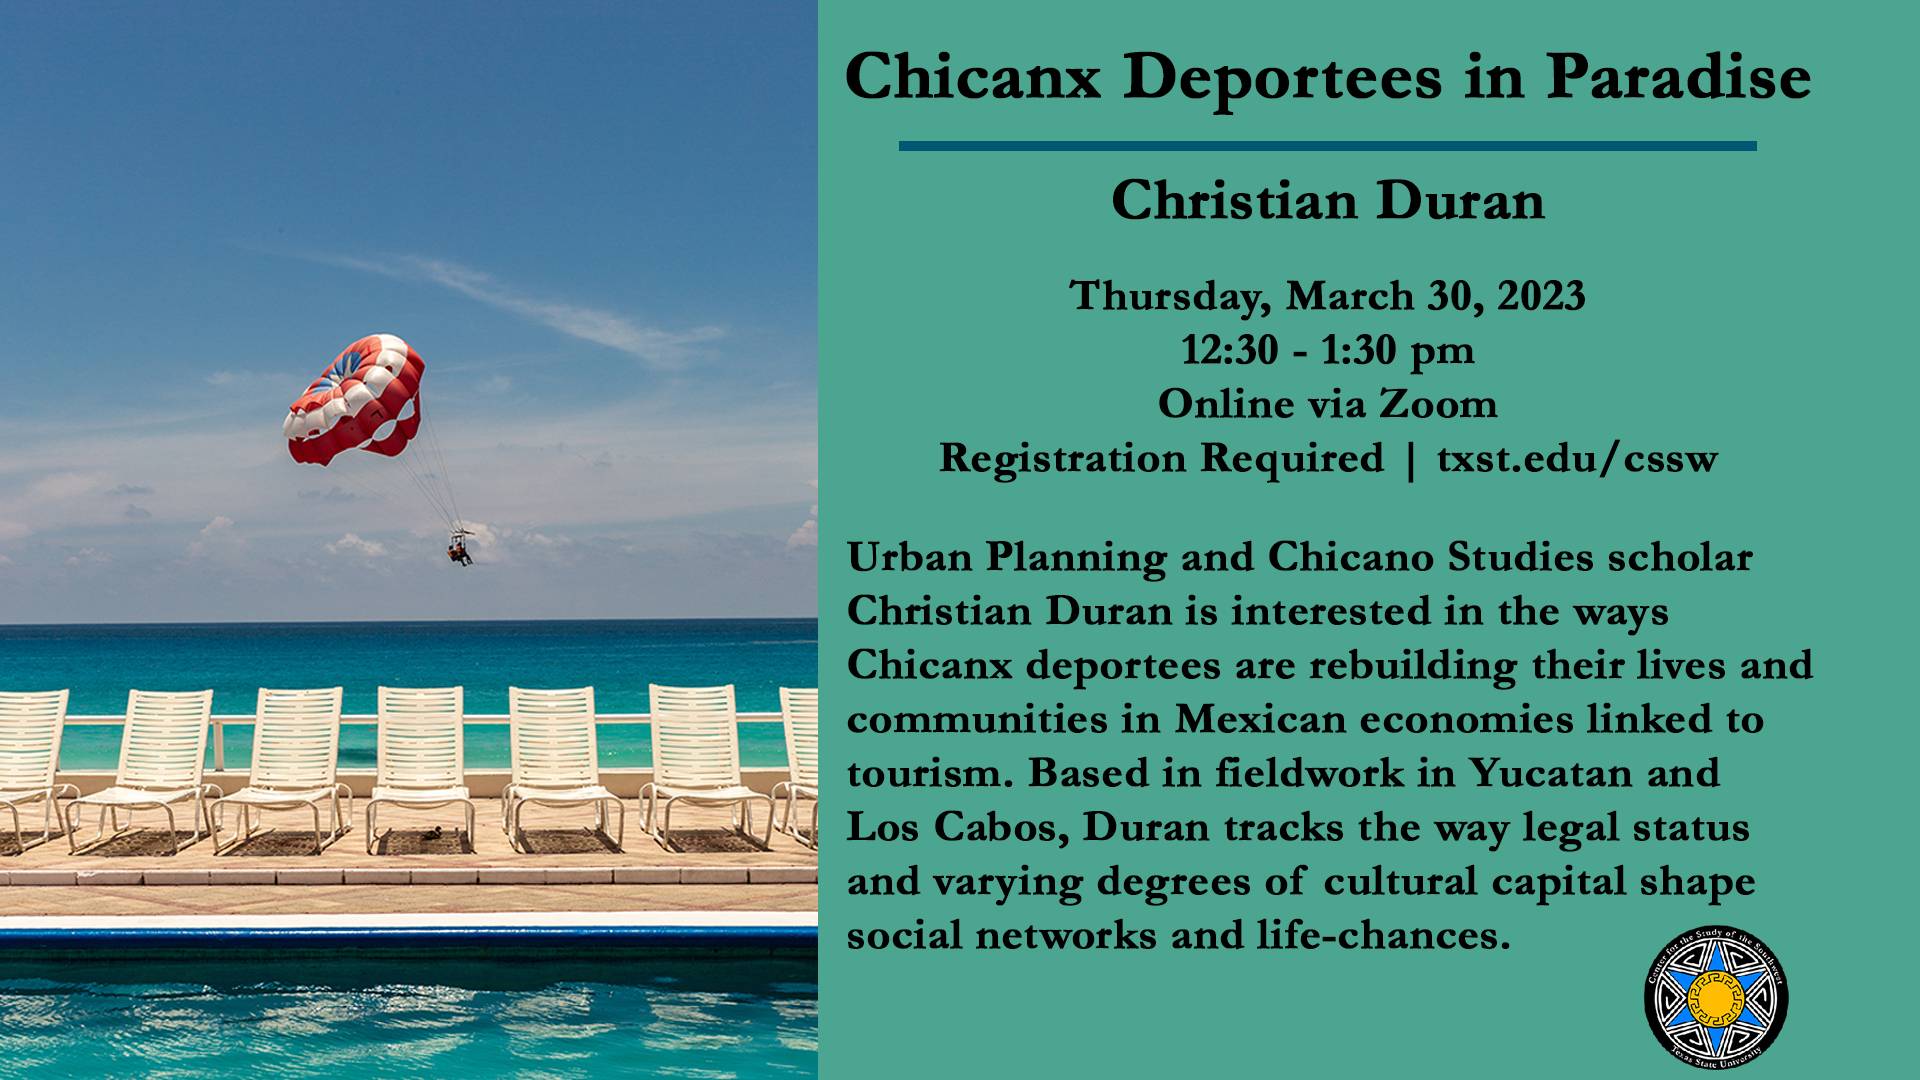 Chicanx Deportees in Paradise